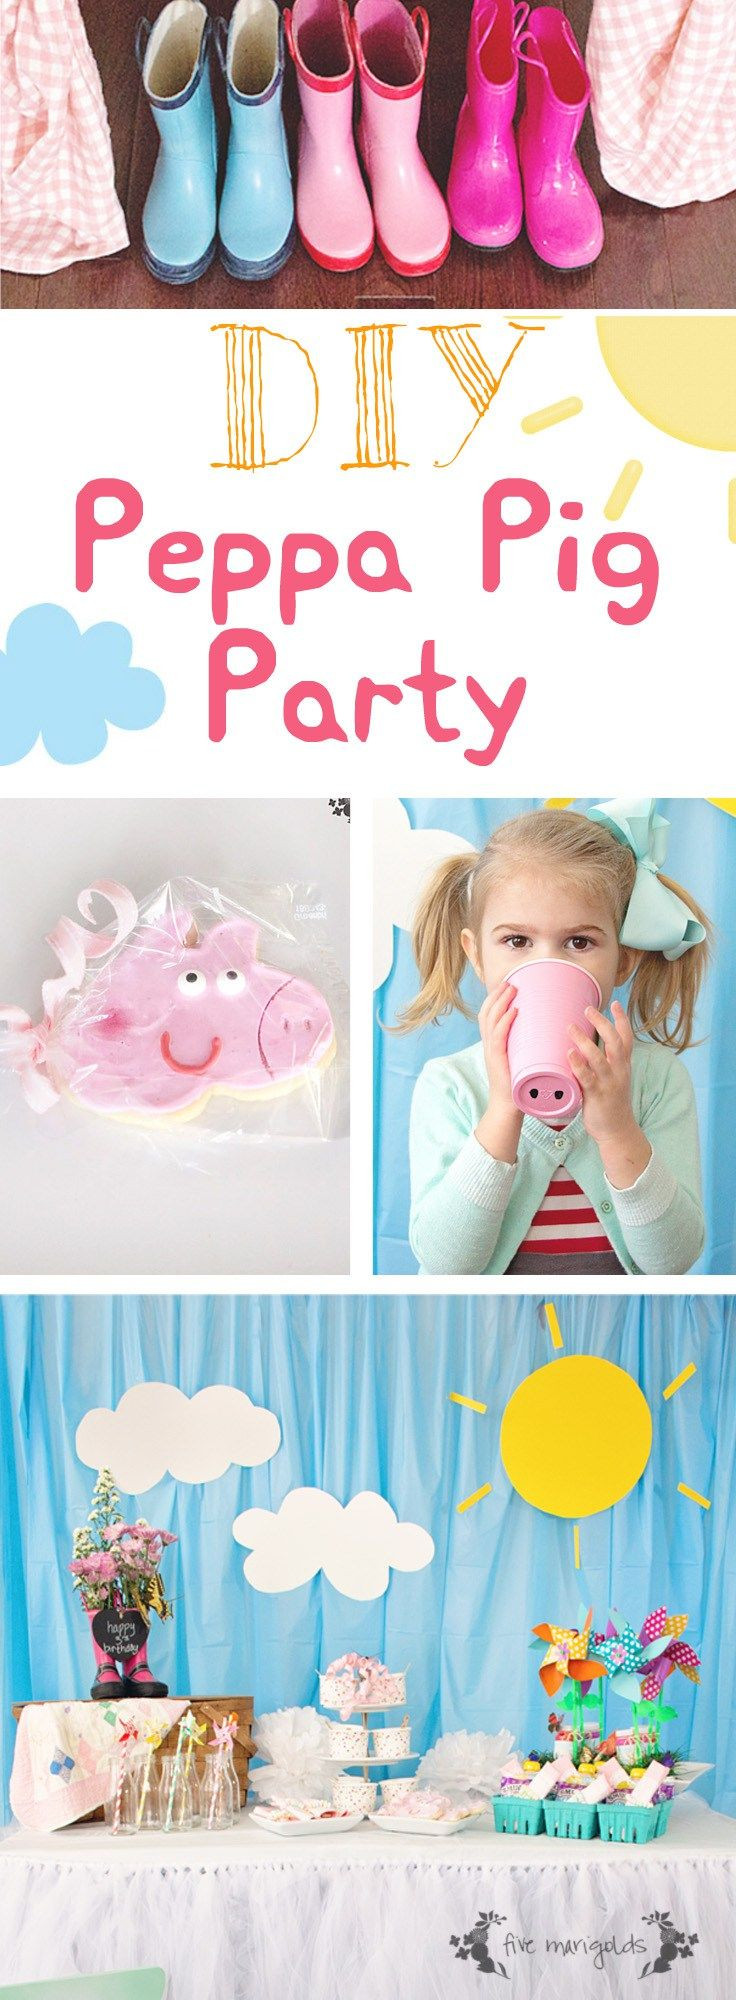 Peppa Pig Birthday Party
 17 Best ideas about Peppa Pig on Pinterest